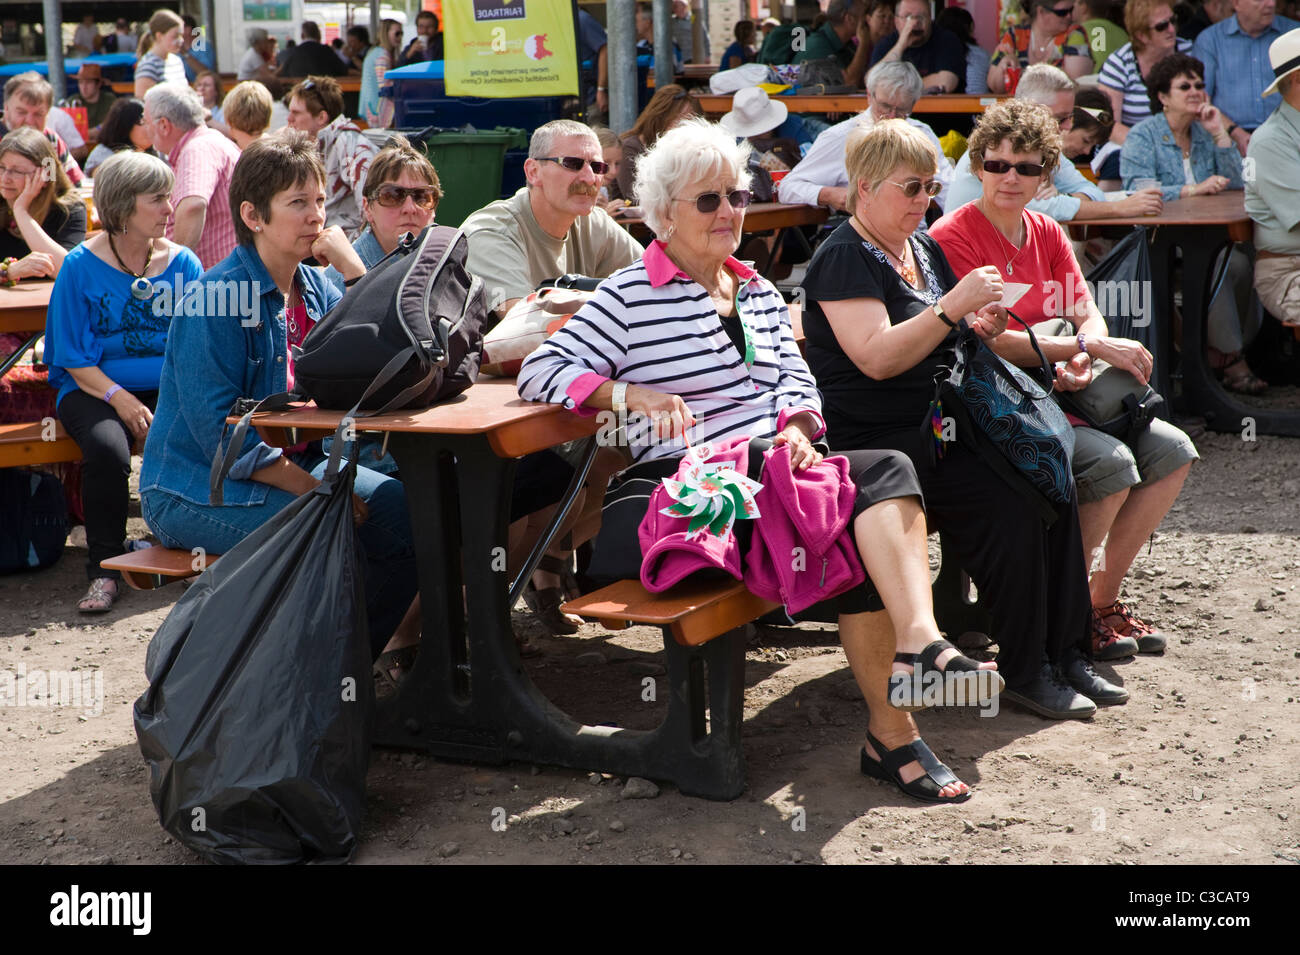 People sat on benches relaxing at National Eisteddfod 2010 Ebbw Vale Blaenau Gwent South Wales UK Stock Photo